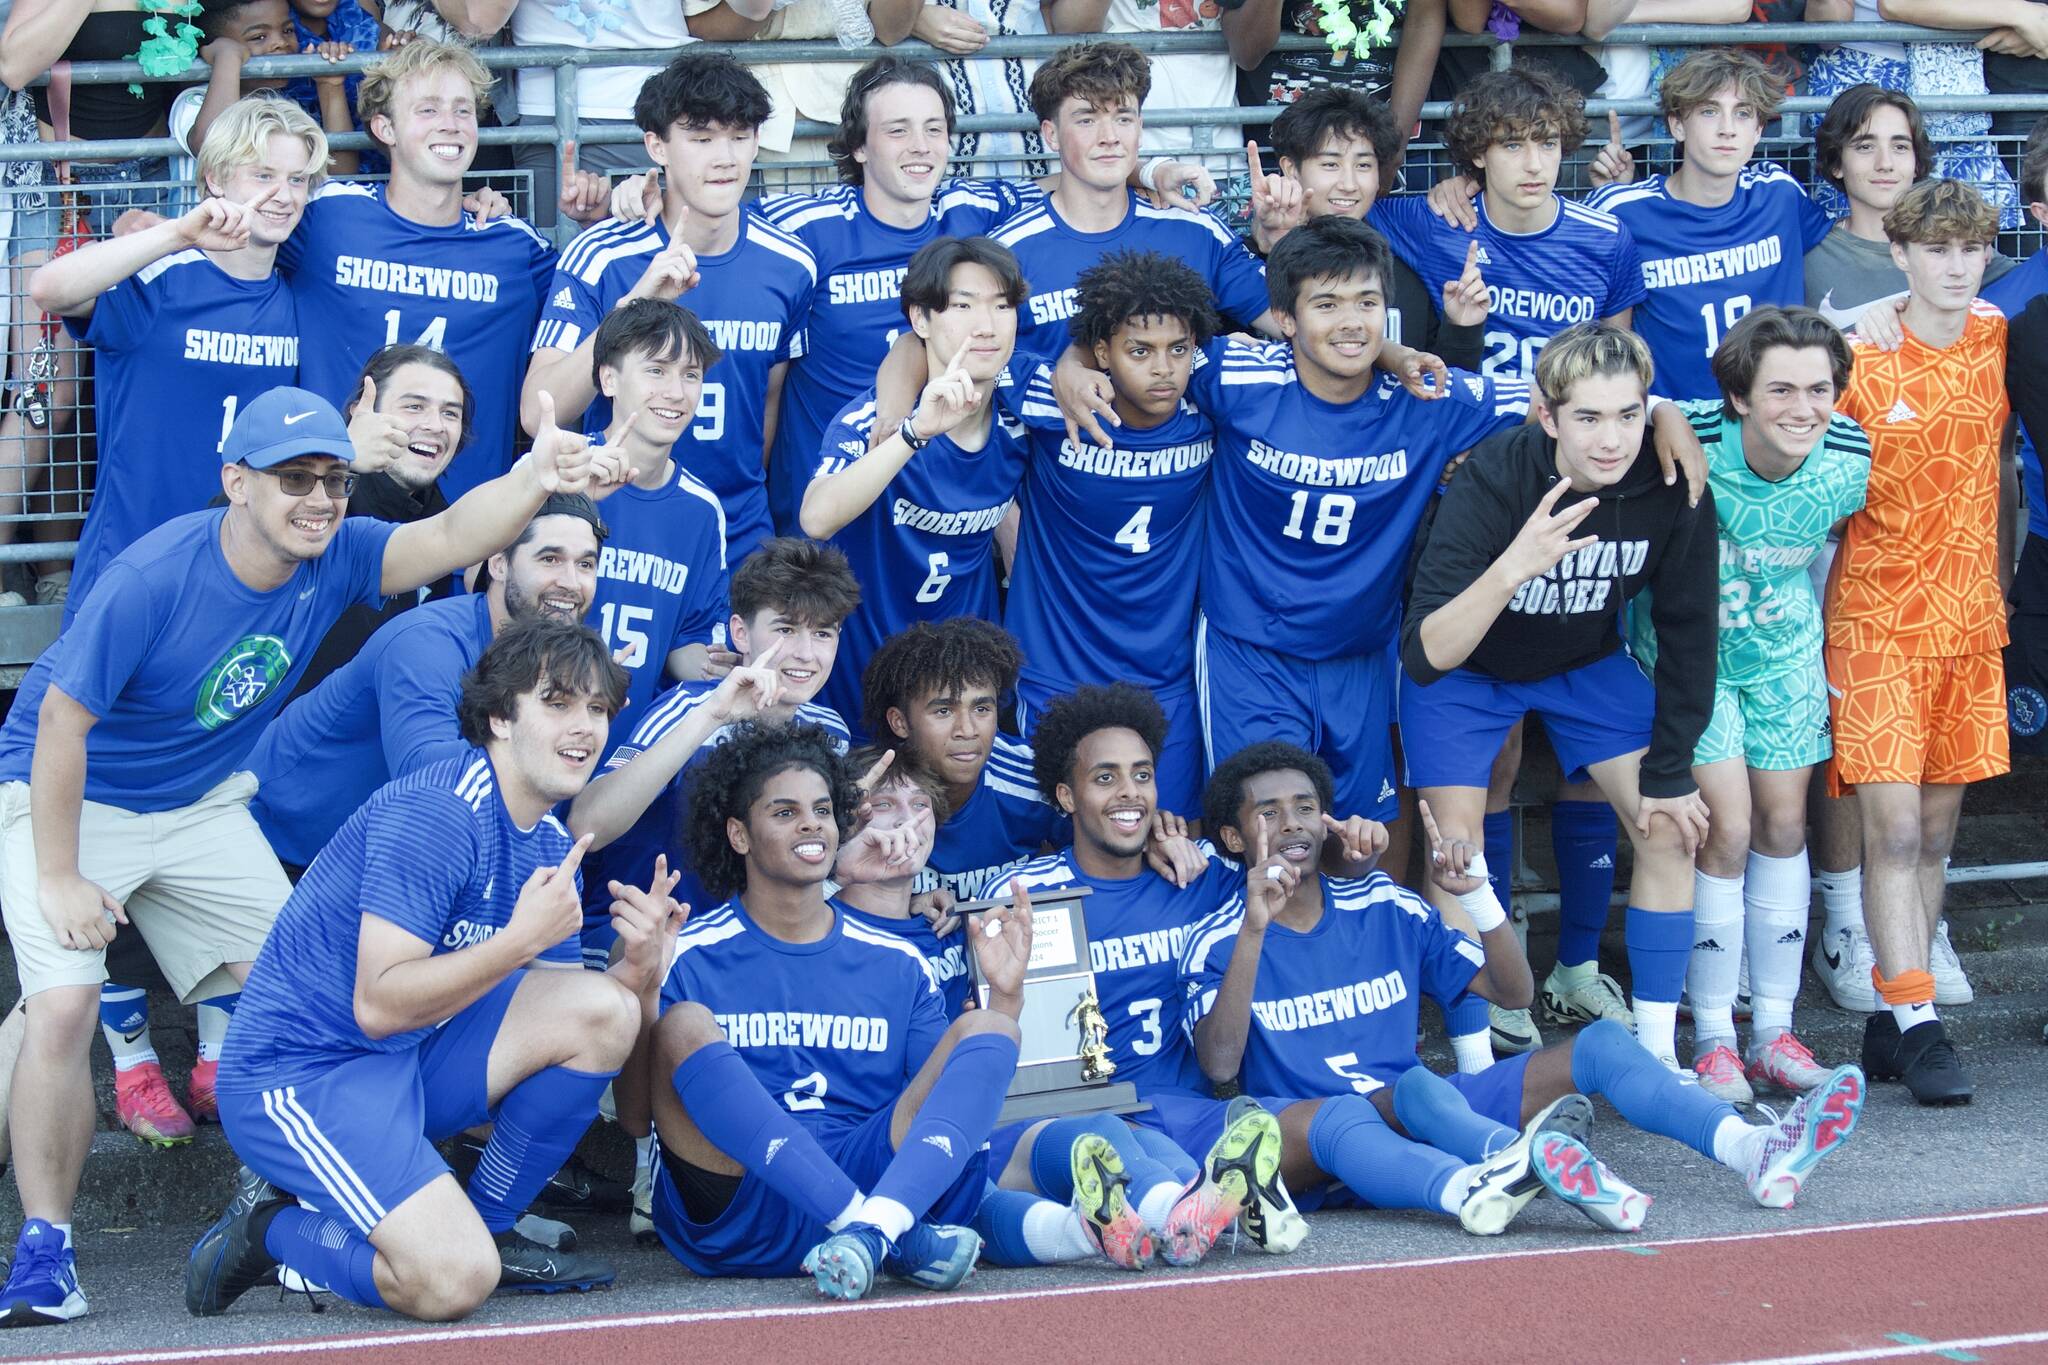 The Shorewood boys soccer team poses for a photo after winning the Class 3A District 1 trophy Saturday at Shoreline Stadium. The Stormrays topped Edmonds-Woodway 2-1. (Taras McCurdie / The Herald)